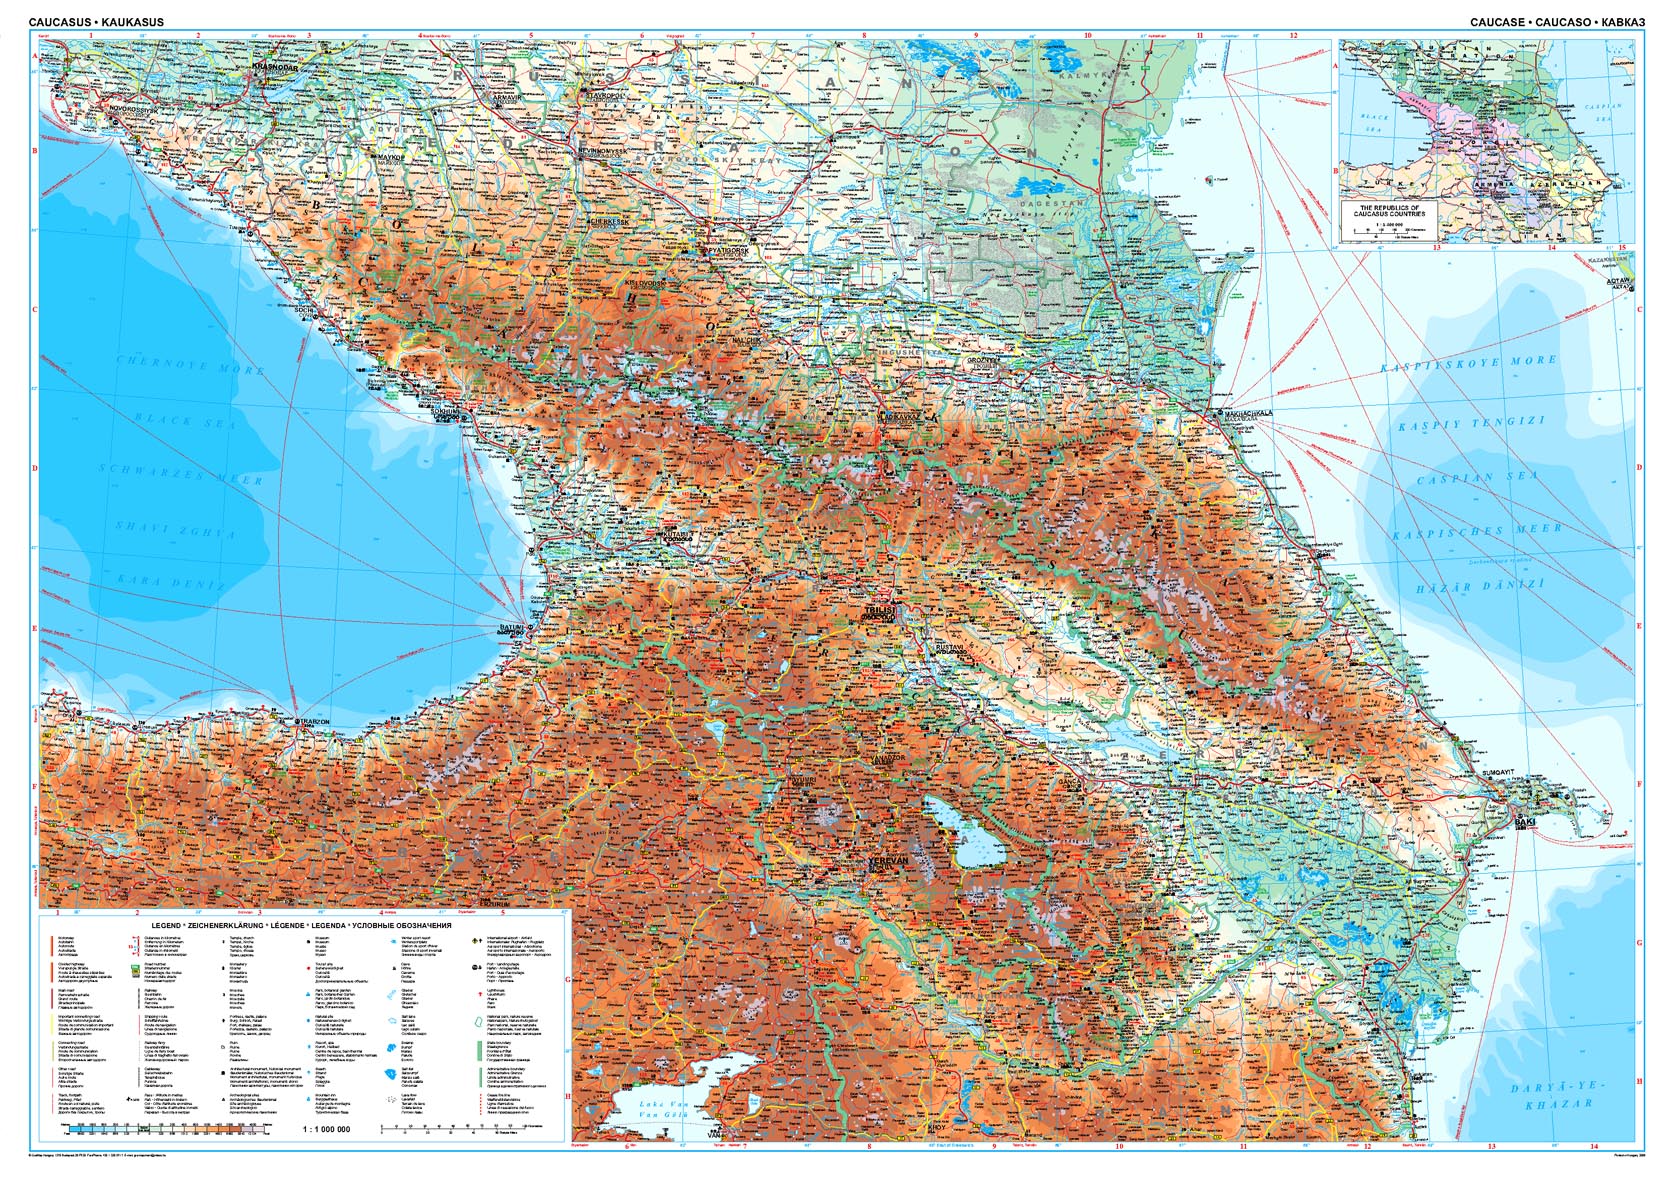 Caucasus (geographical) overview map